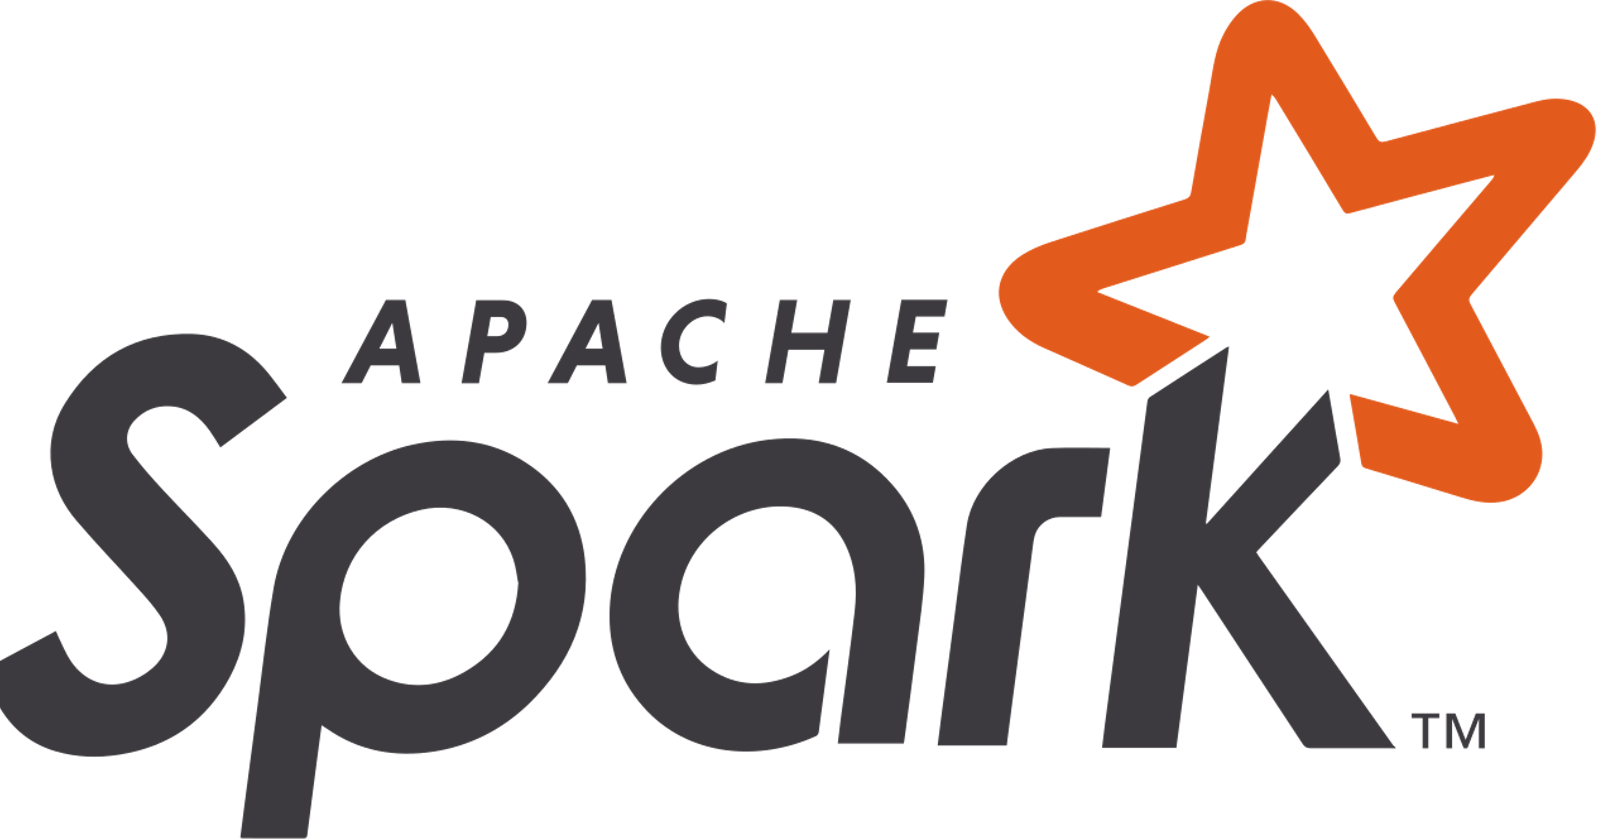 To install Apache Spark and run Pyspark in Ubuntu 22.04